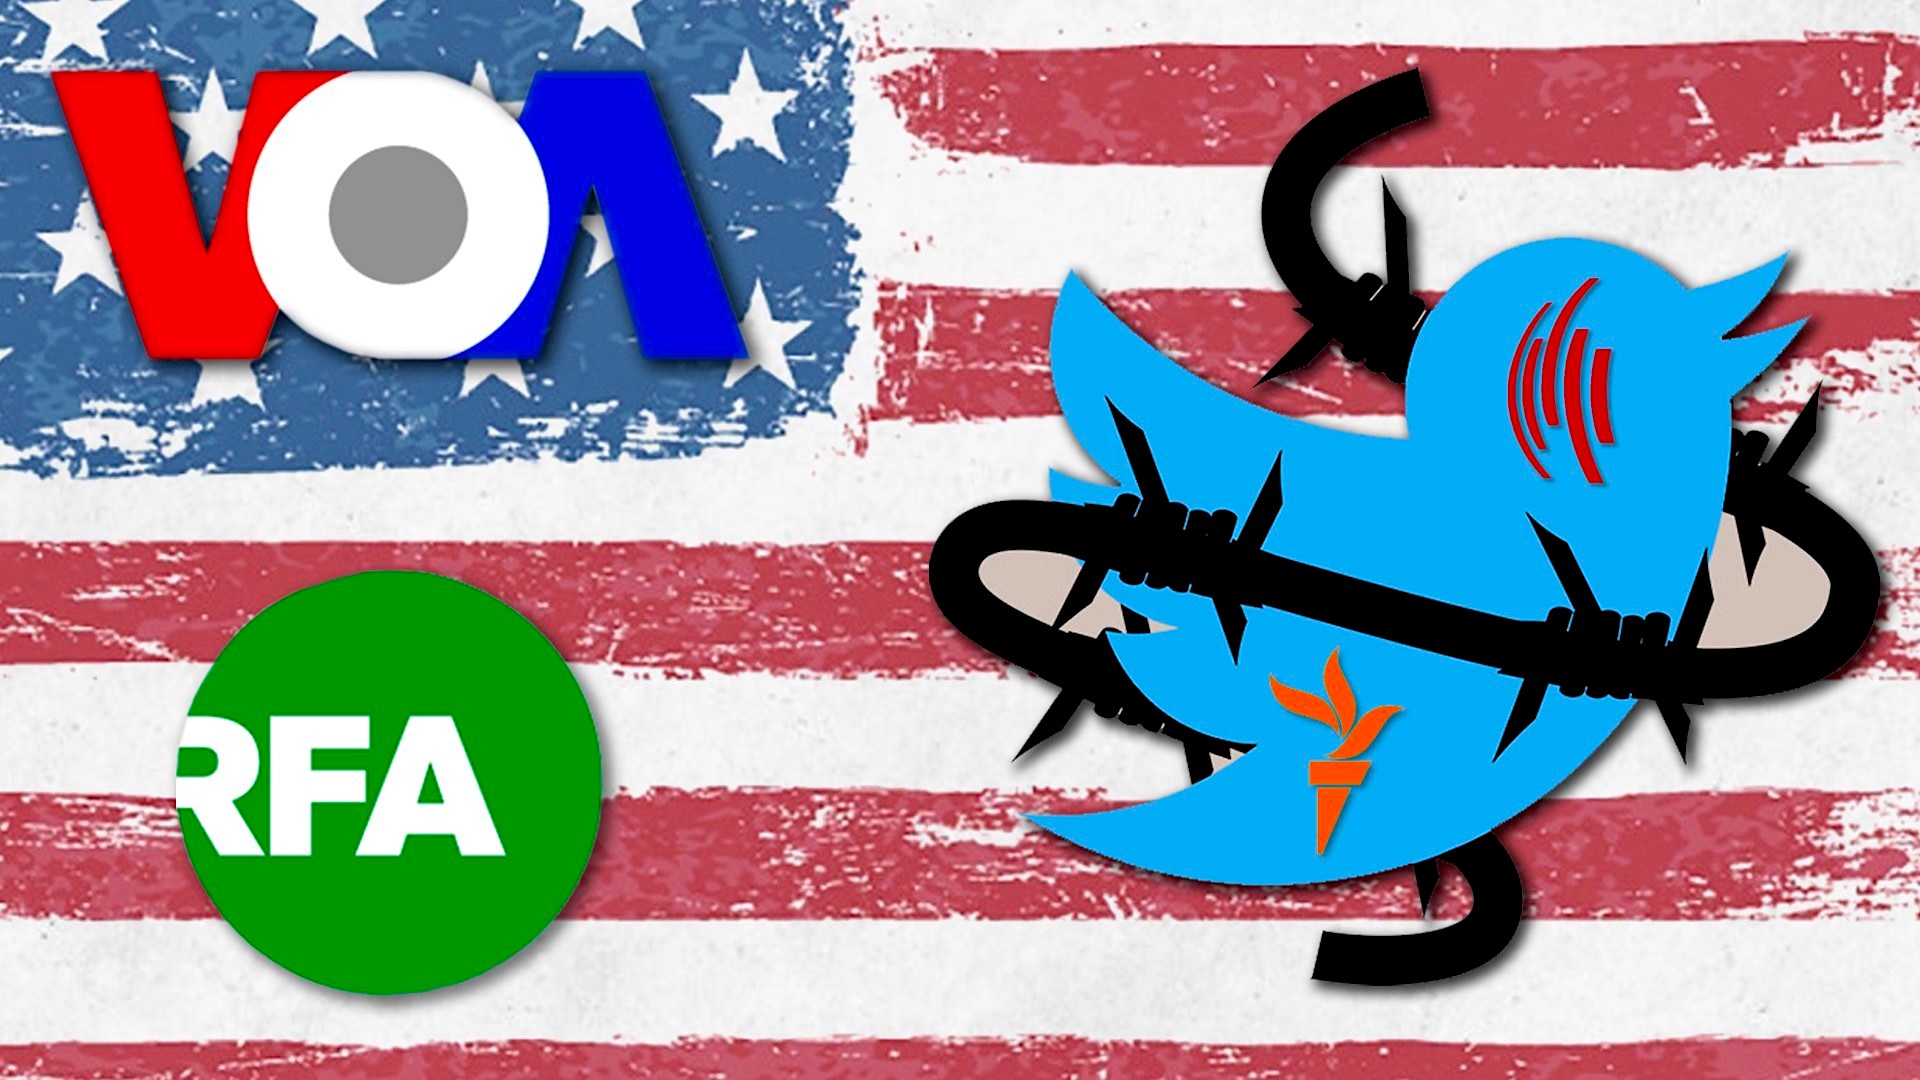 Twitter Says It Bans State-Media Ads, But Gets Paid to Spread US Government Messaging